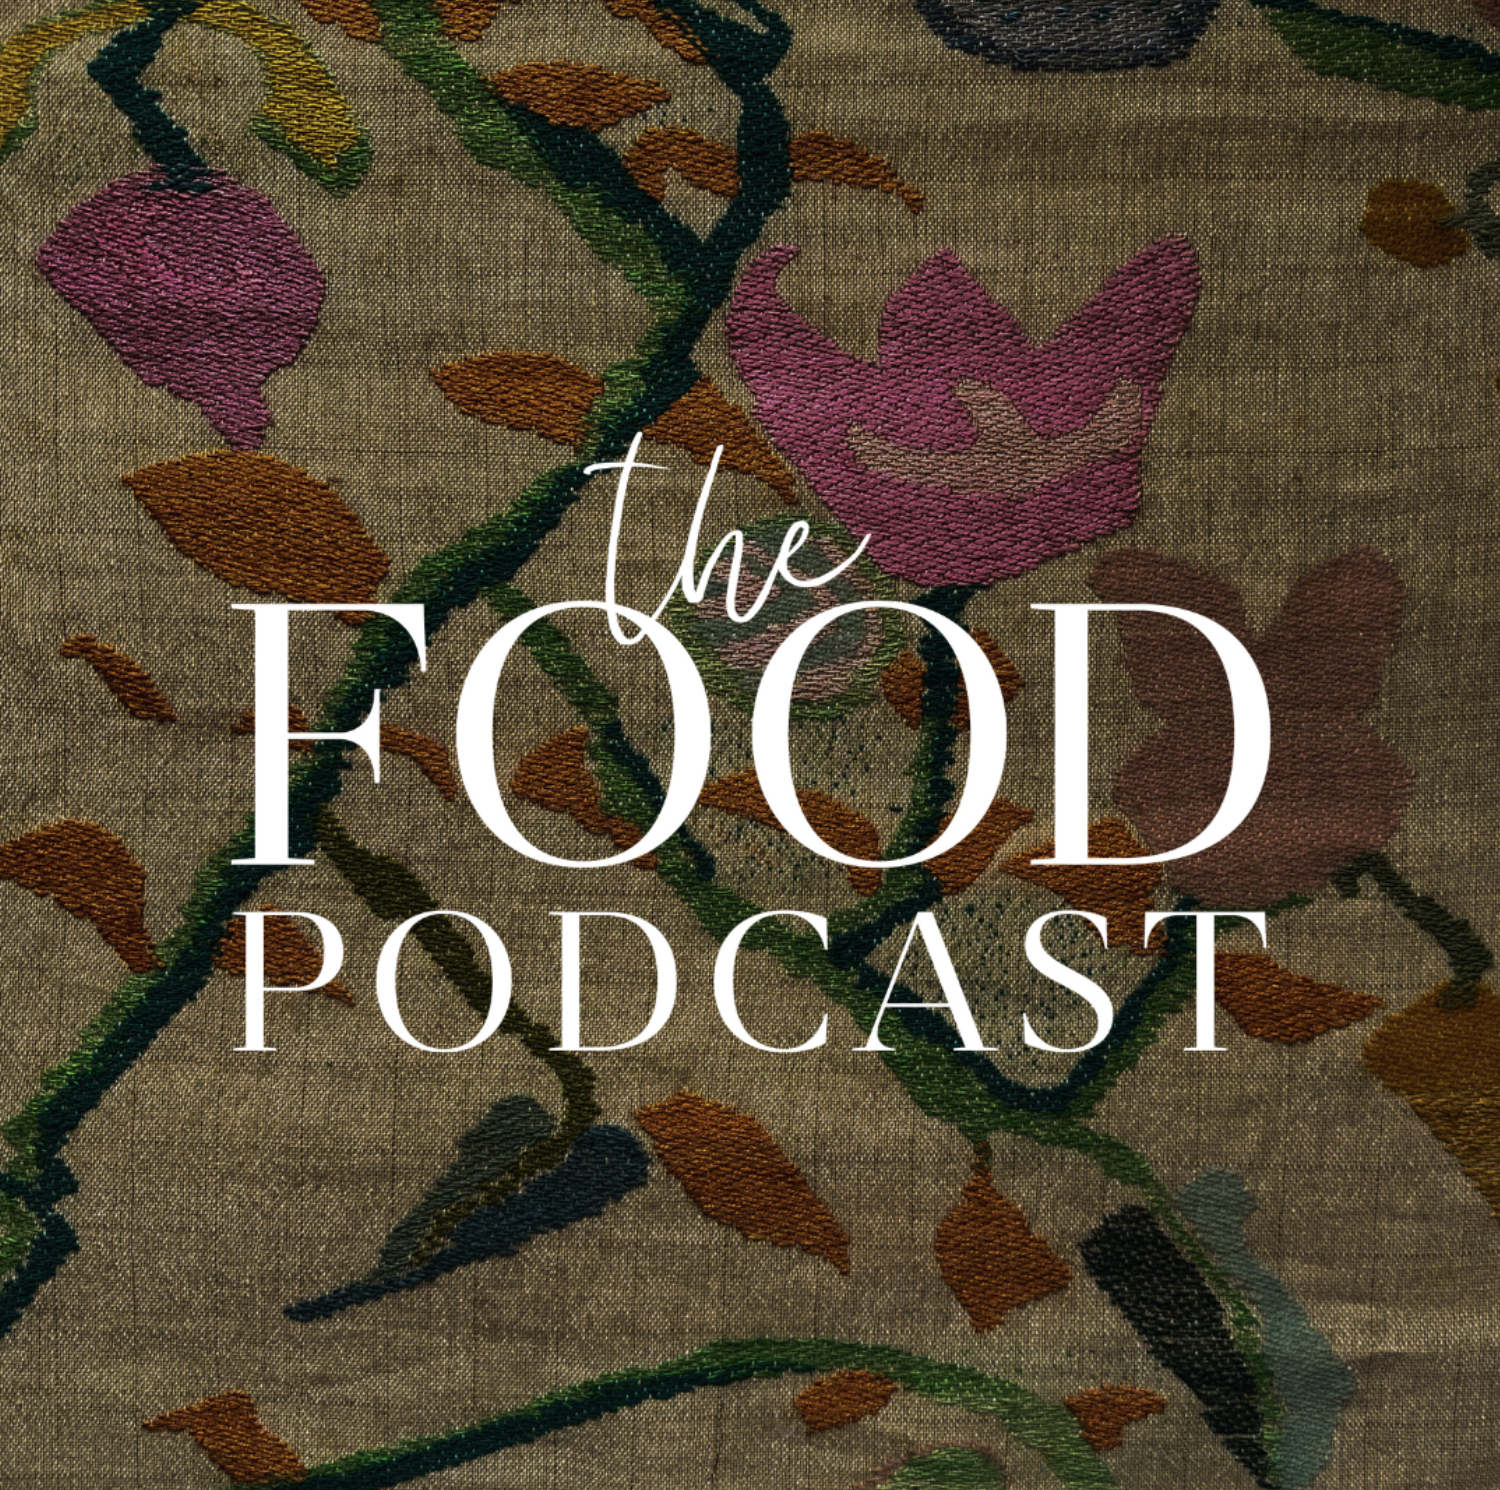 The Food Podcast overlay on a weaving